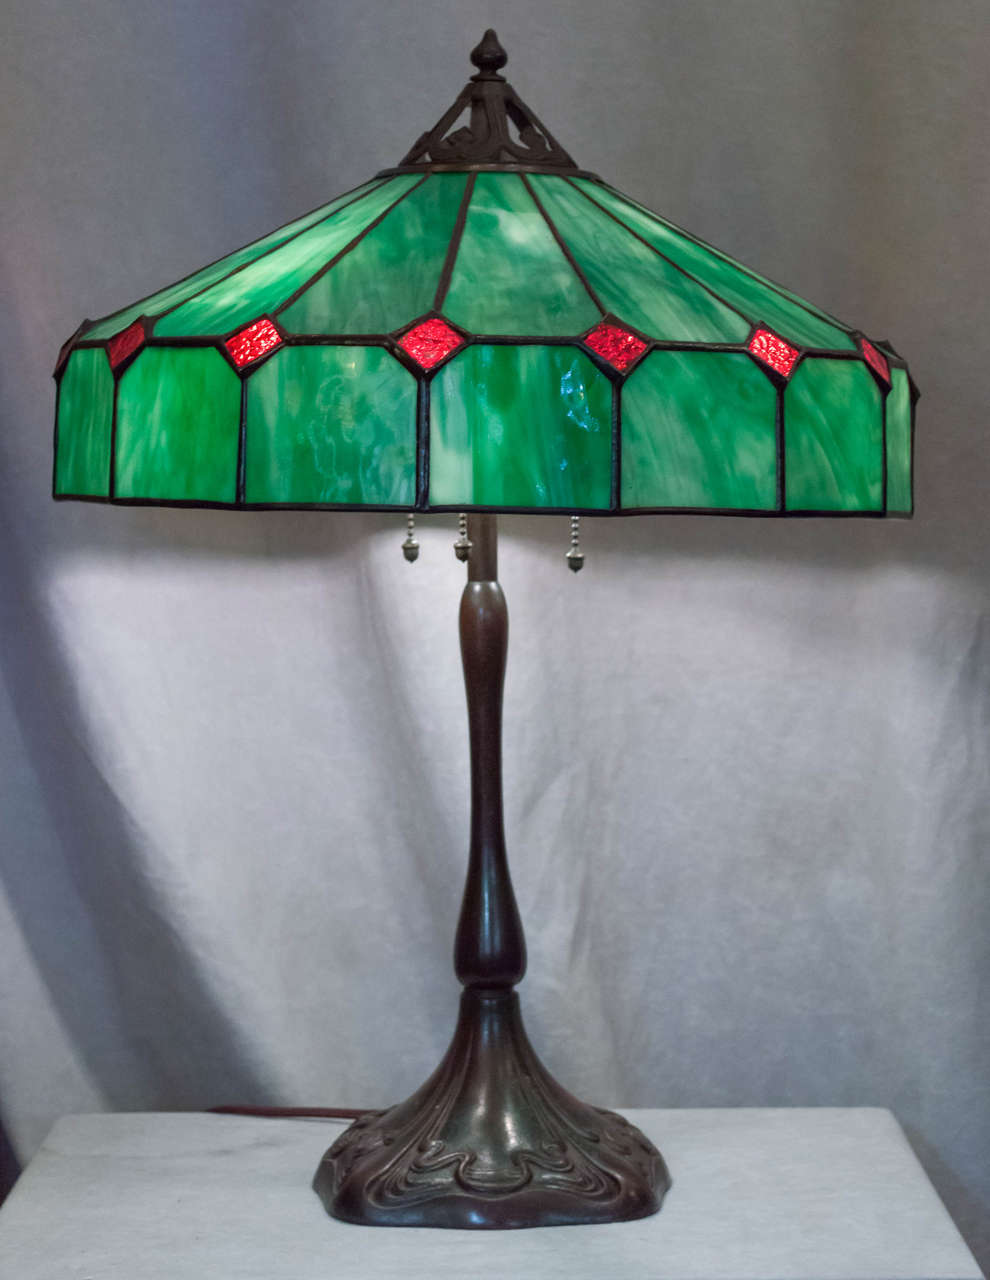 This simple yet elegant lamp was produced by the Handel Co. Both shade and base are signed. This is an earlier lamp by this company before they started to make their popular painted shades. The base is bronze, and very art nouveau in design. The